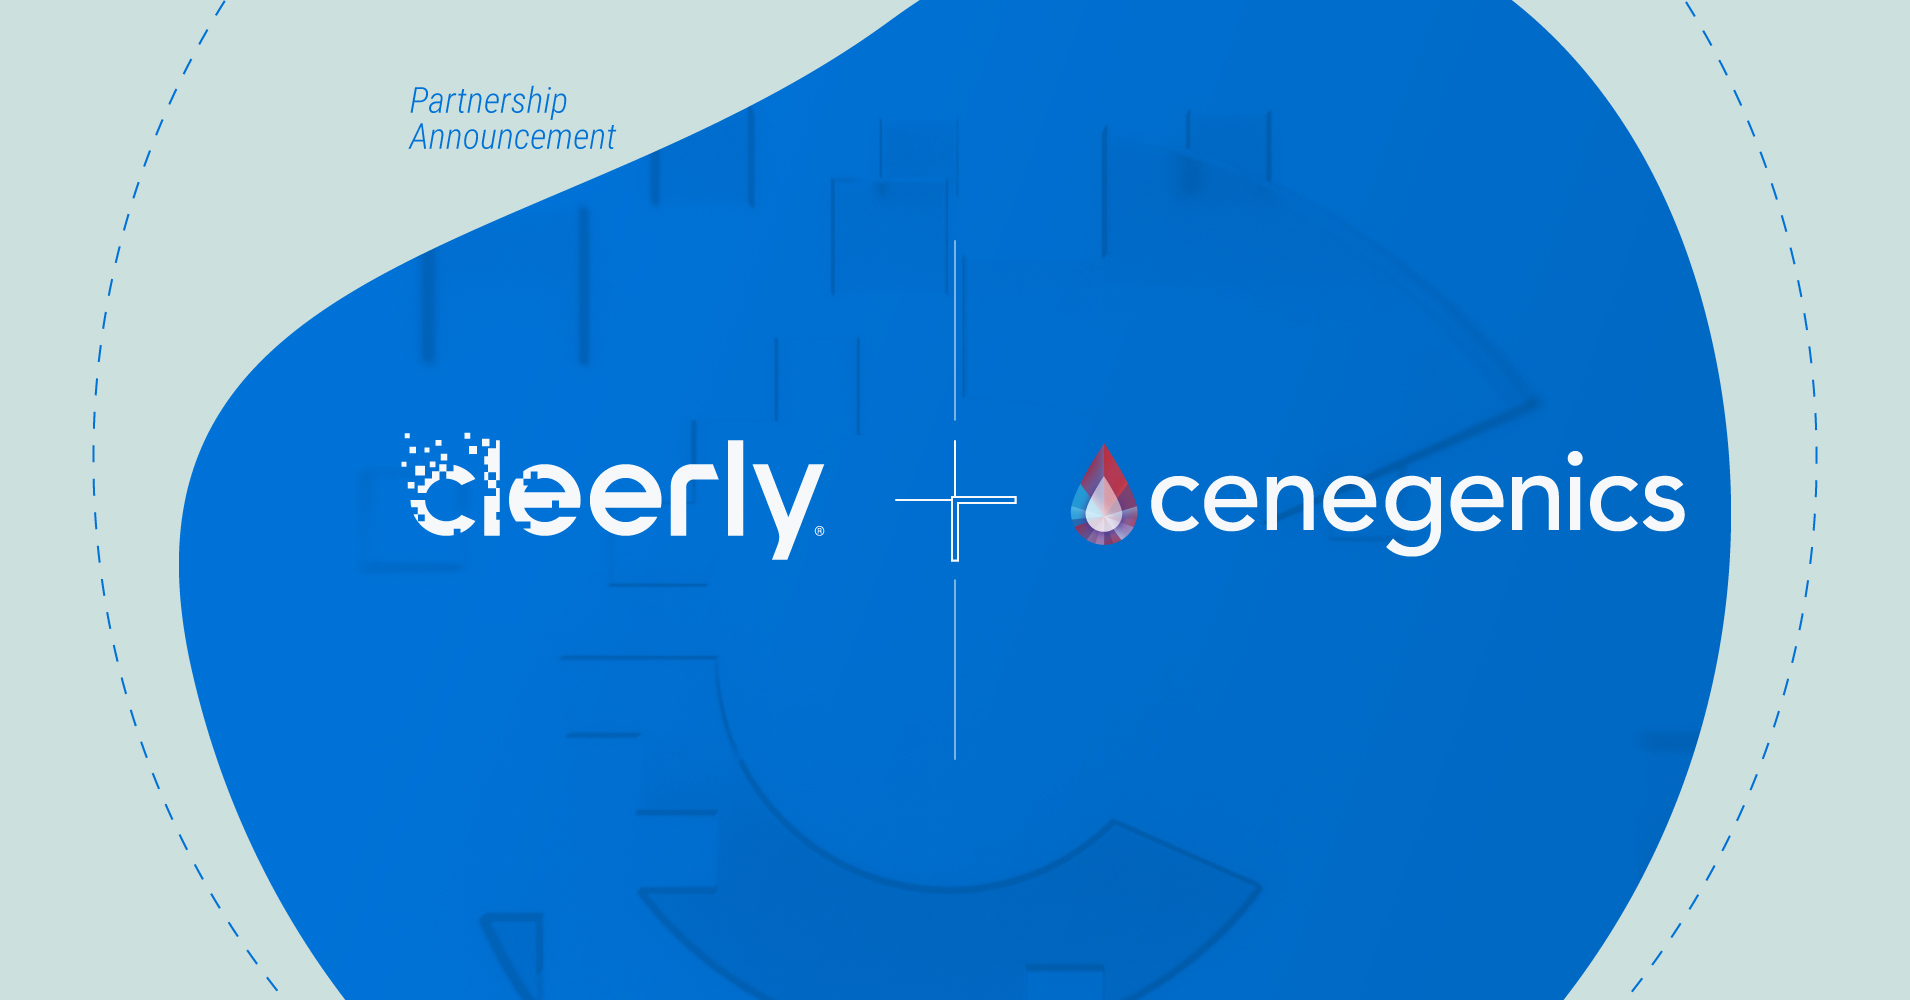 Partnership announcement: Cleerly partners with Cenegenics